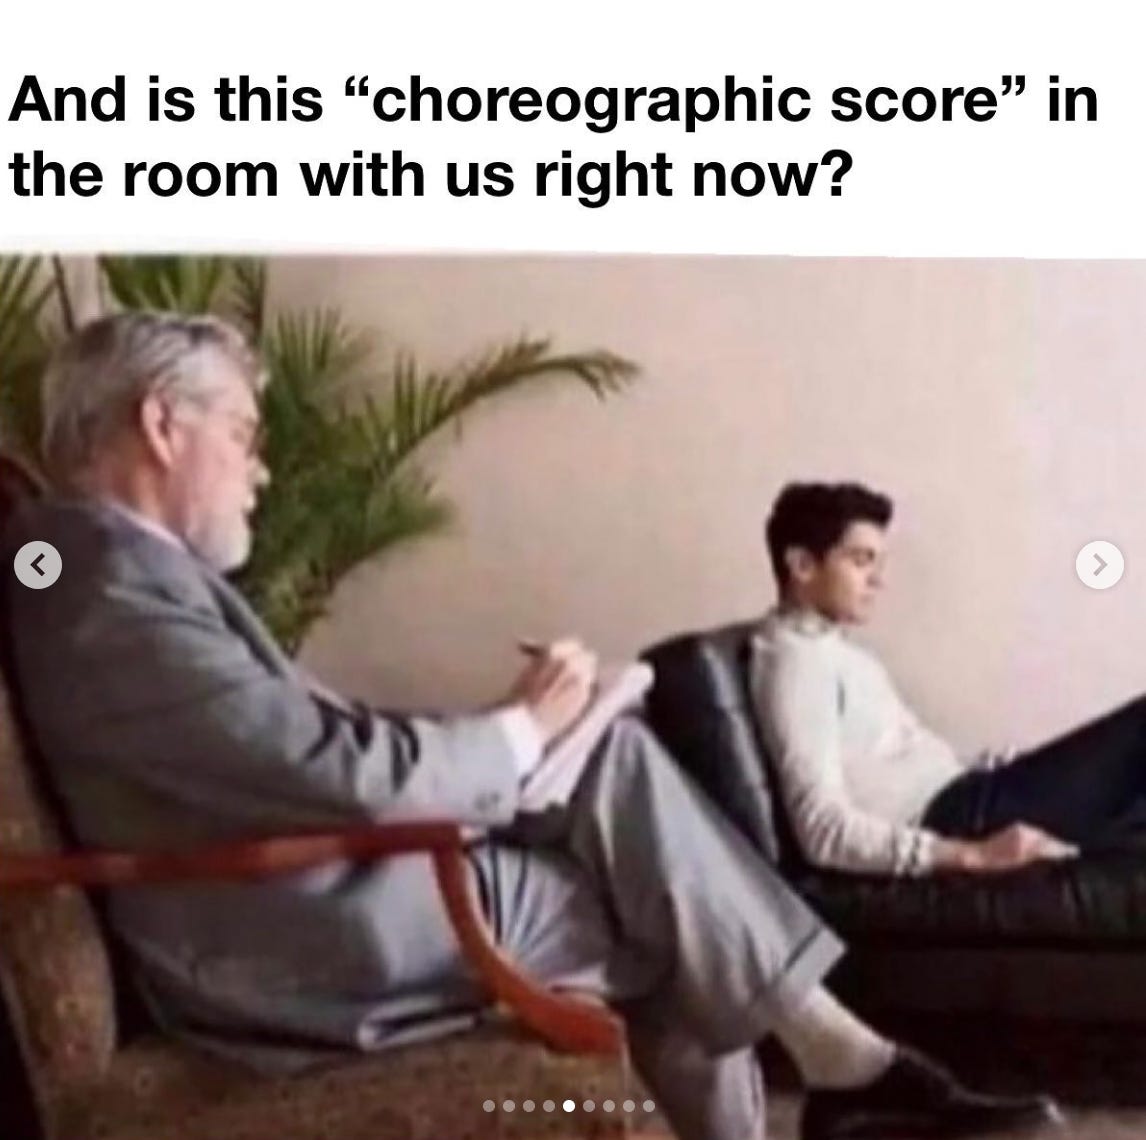 a classic image of a therapy session, featuring two white men. the older one is the therapist, asking the younger man, "And is this "choreographic score" in the room with us right now?